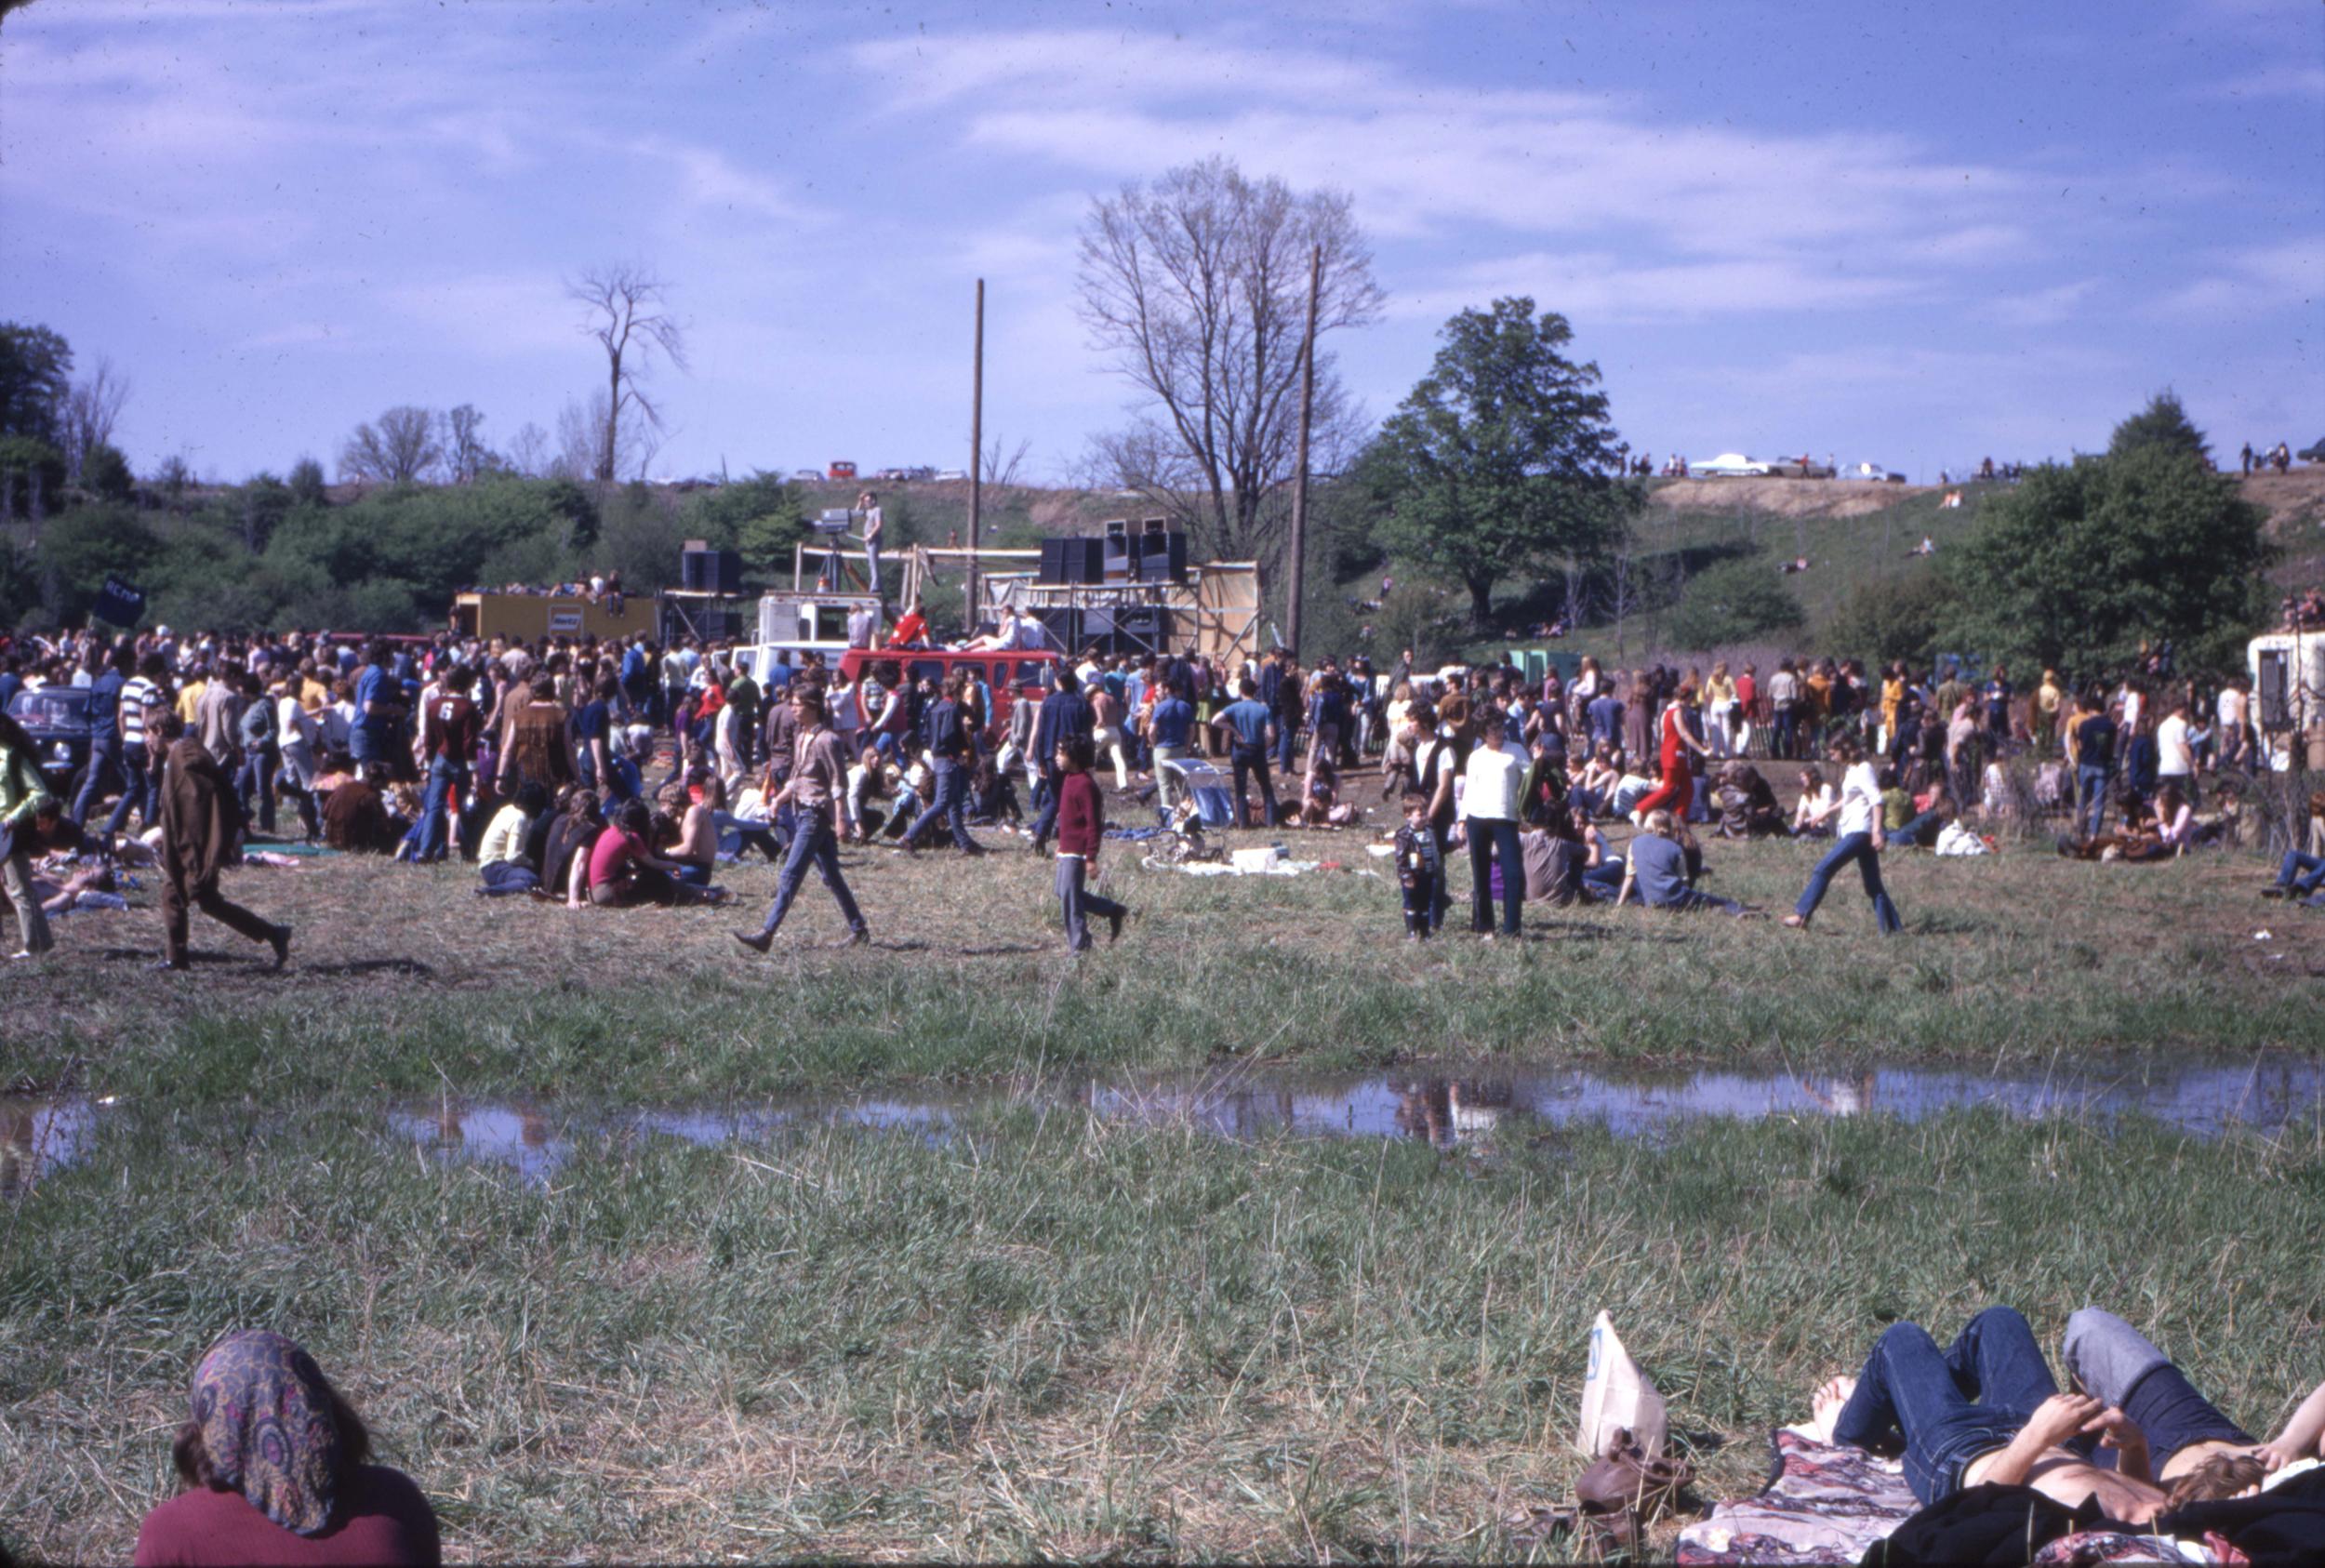 A group of people gathered around a stage that’s in the middle of a field.